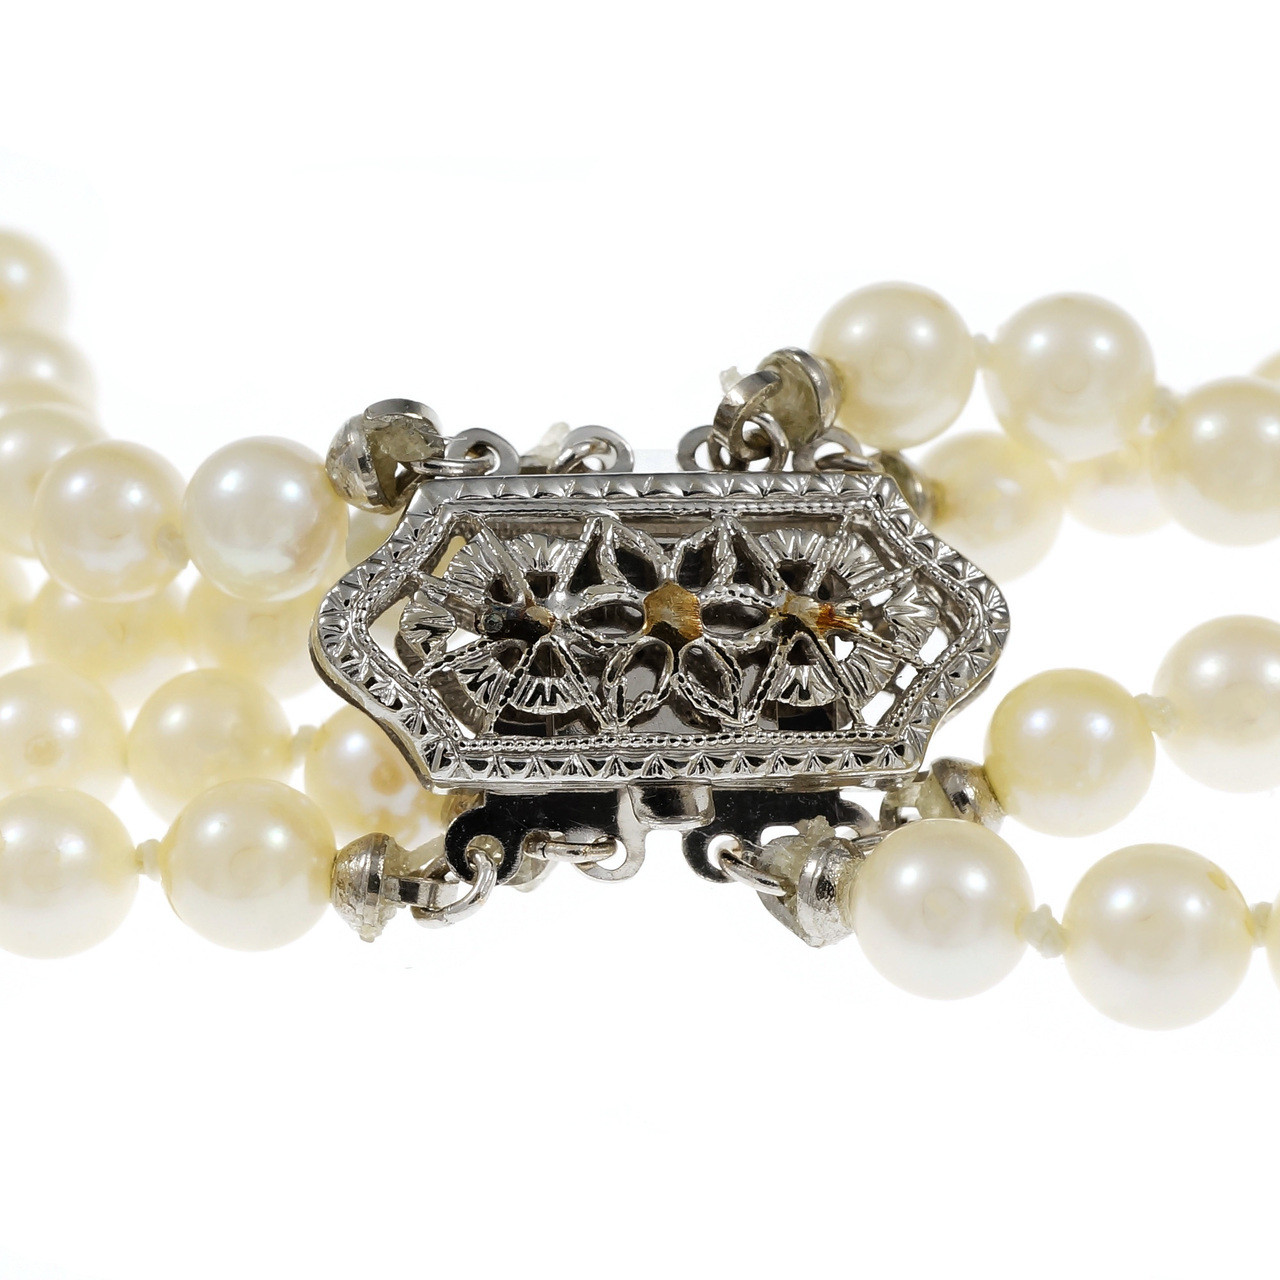 4-Strand Pearl Bracelet with Floral Diamond Clasp